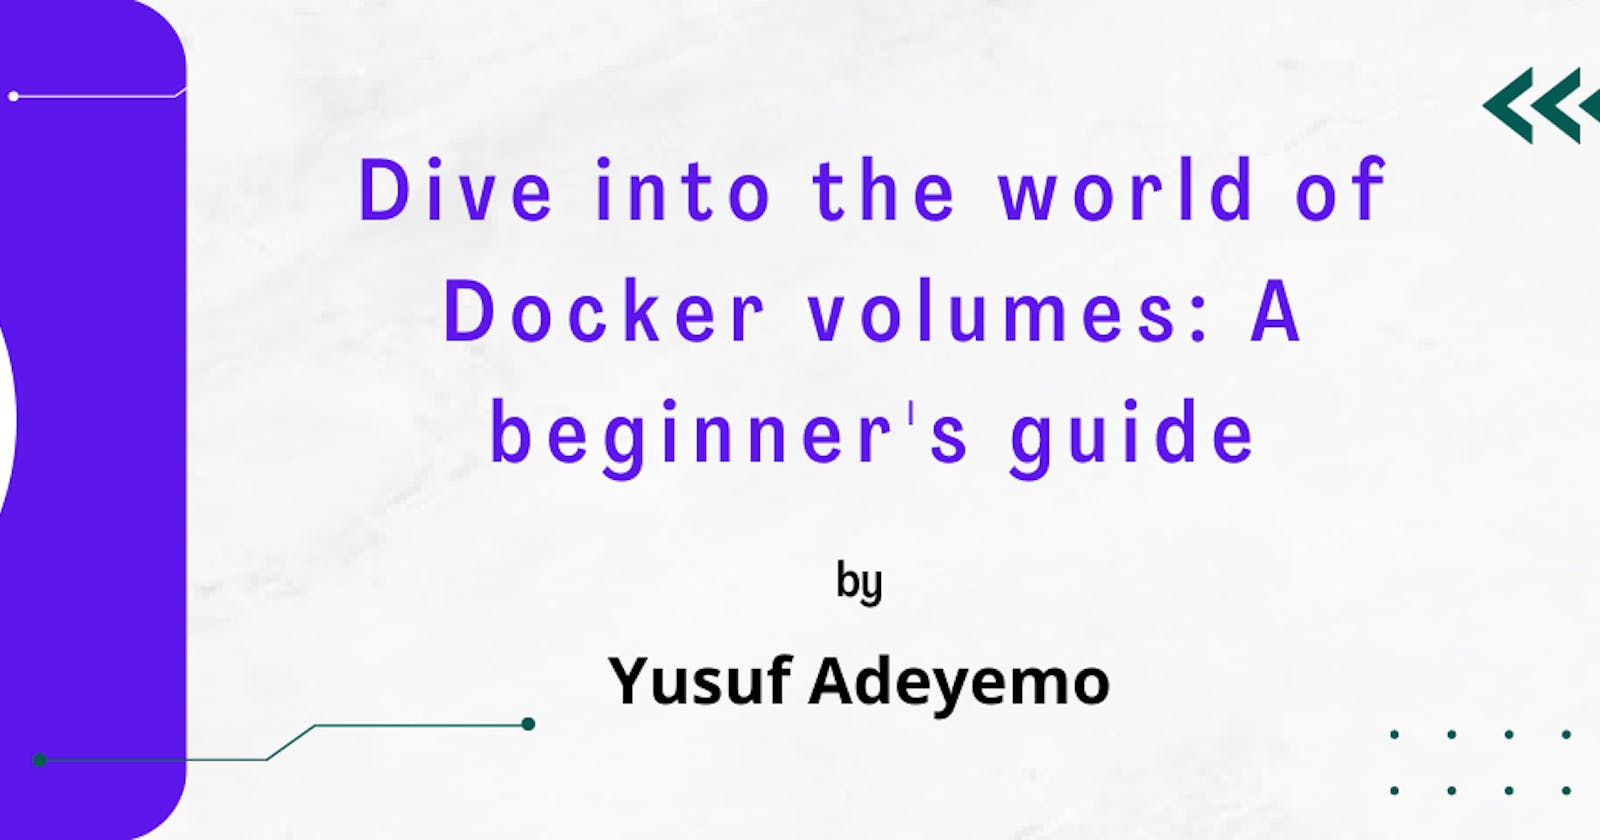 Dive into the world of Docker volumes: A beginner's guide